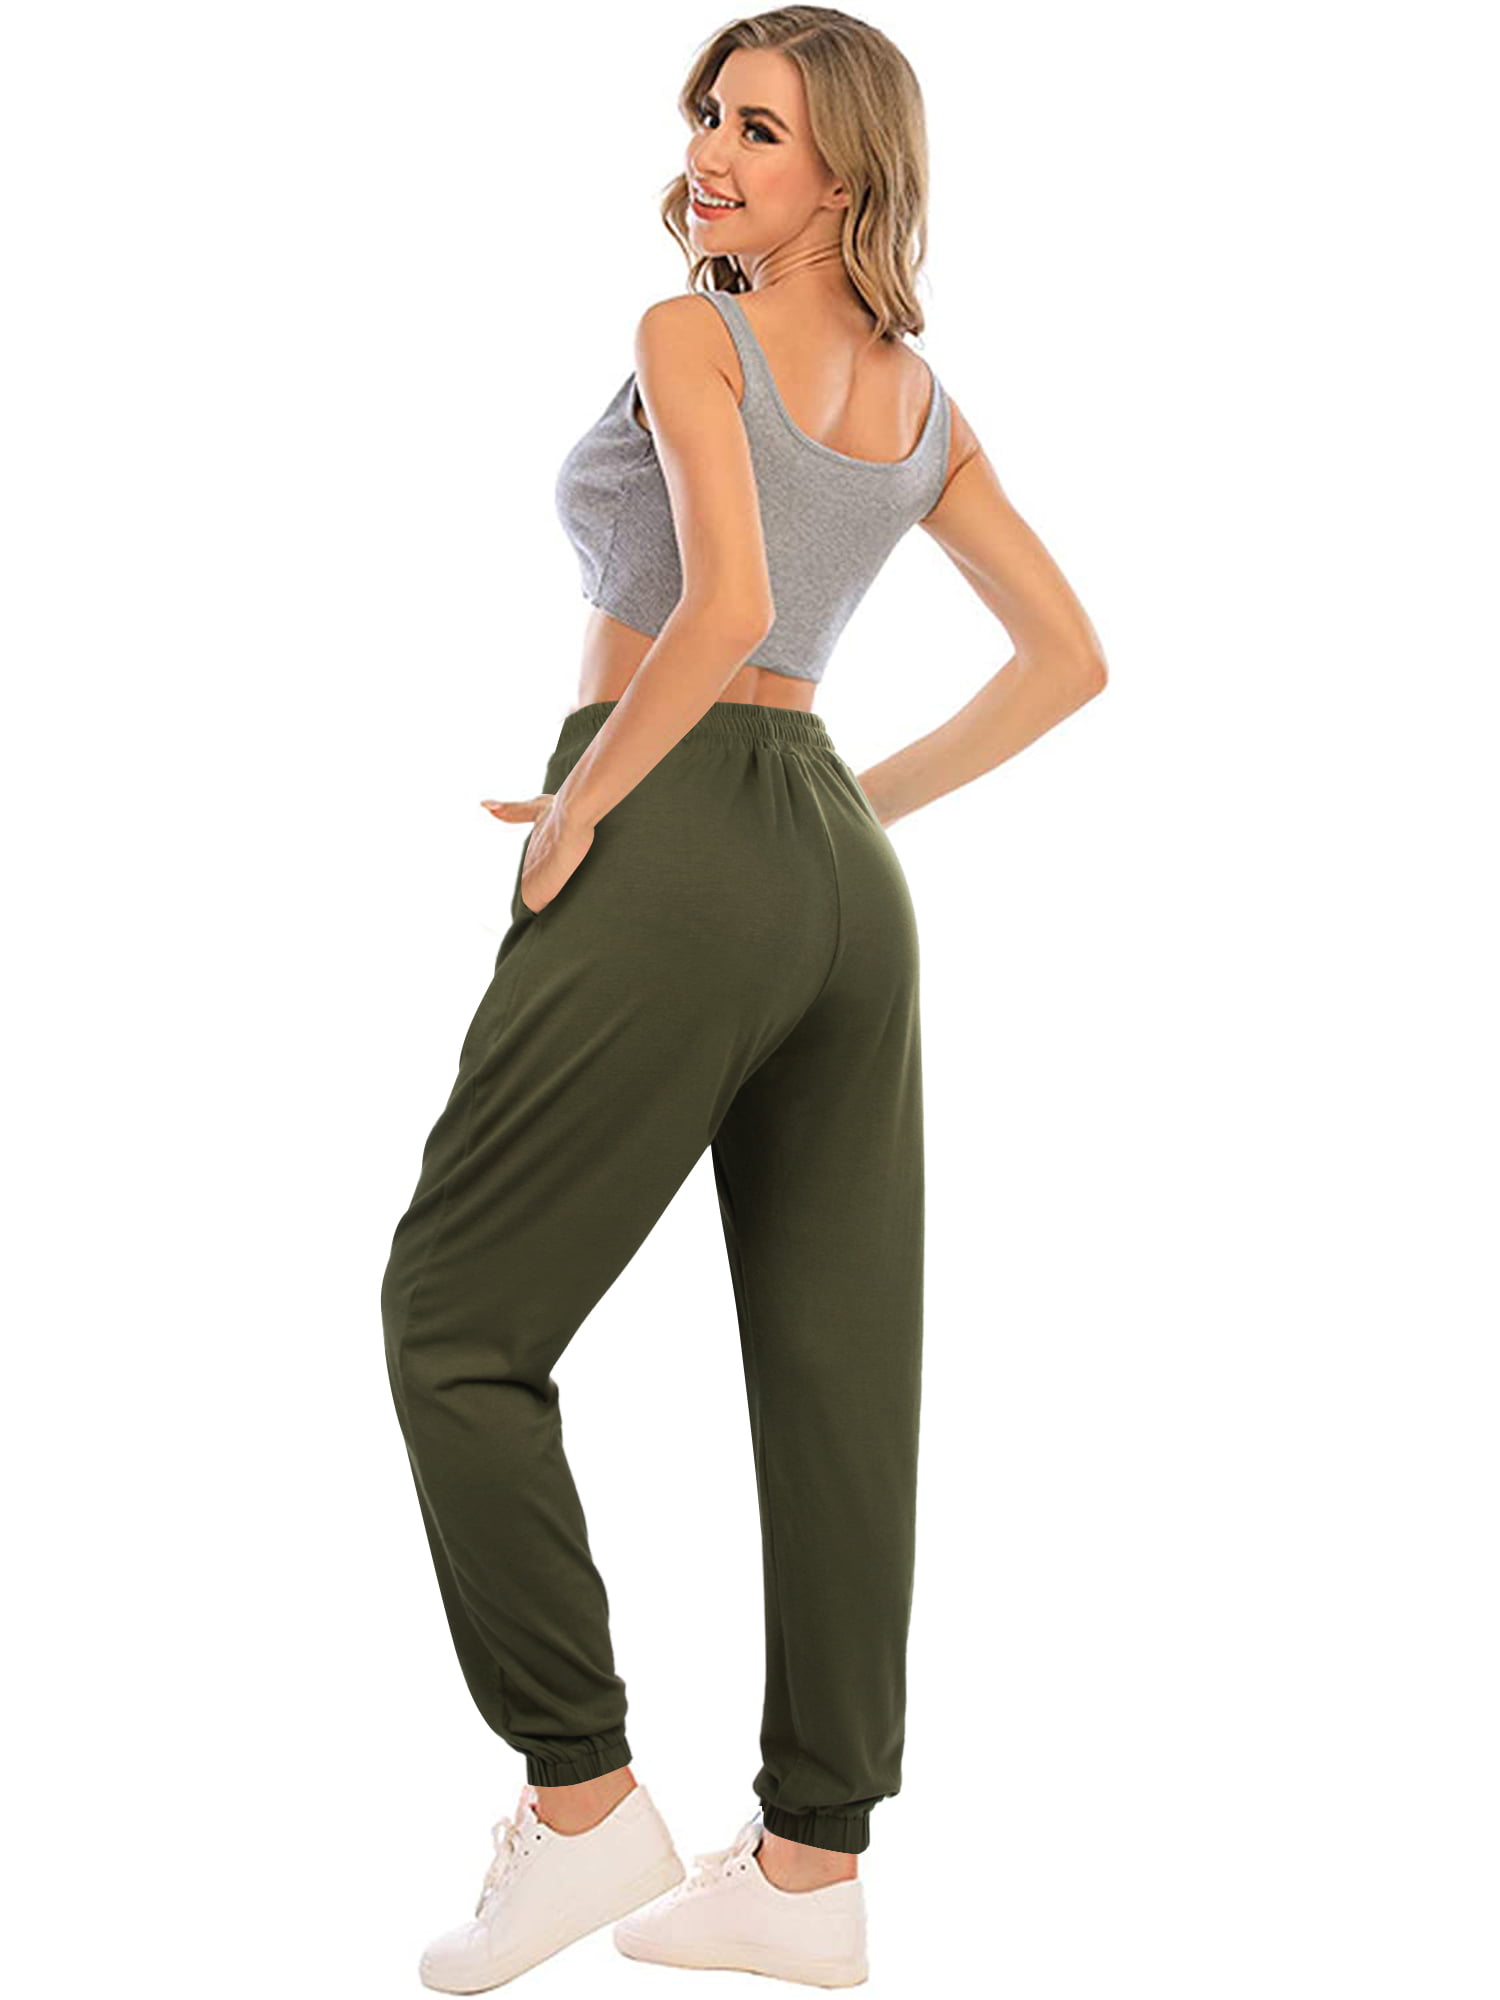 sshybmne Womens Running Jogger Sweatpants High Waist Drawstring Trousers Yoga Workout Track Lounge Pants with Pockets